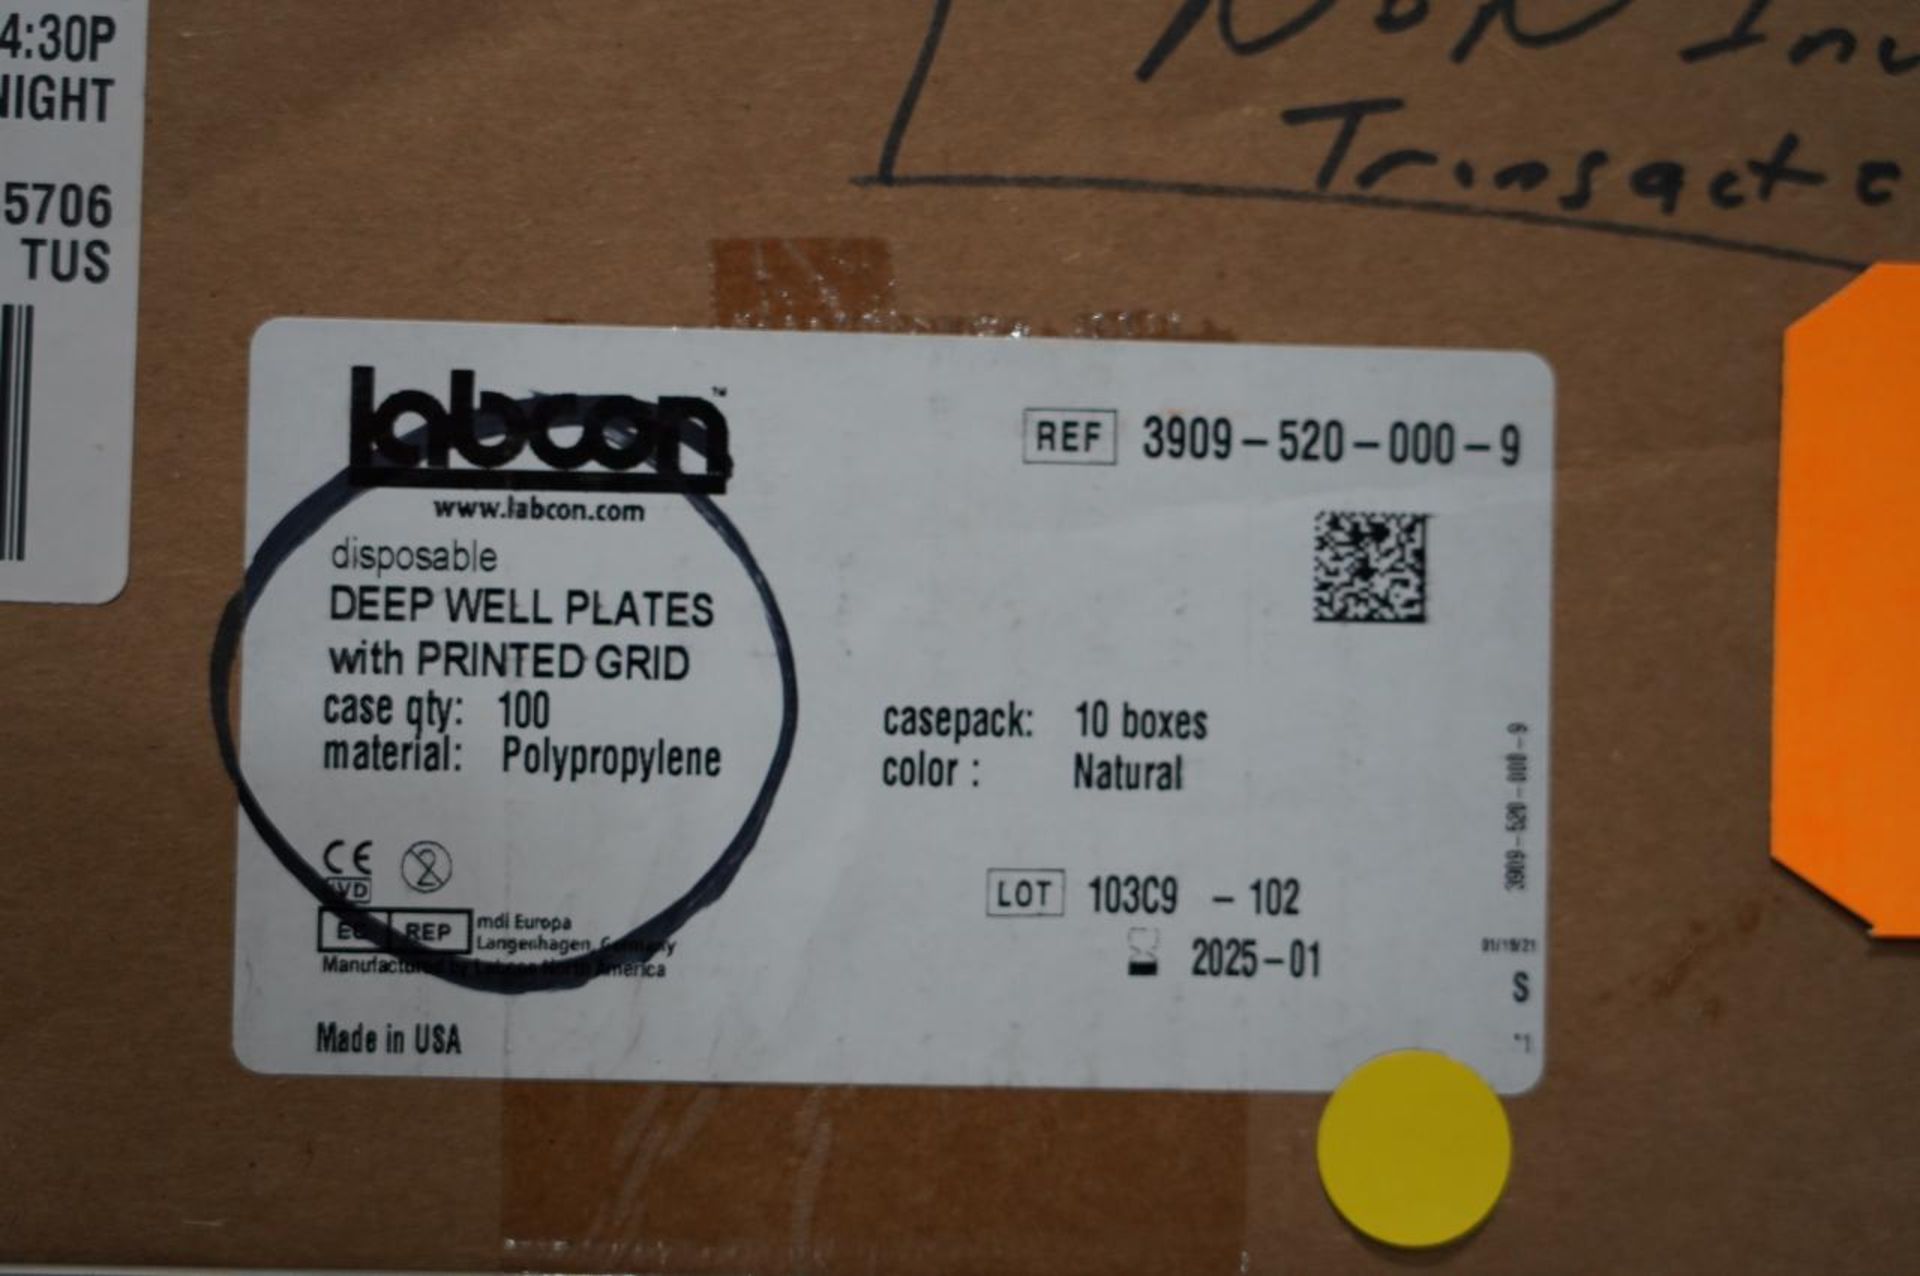 Labcon 3908-520-000-9 Deep Well Plates - Image 3 of 3